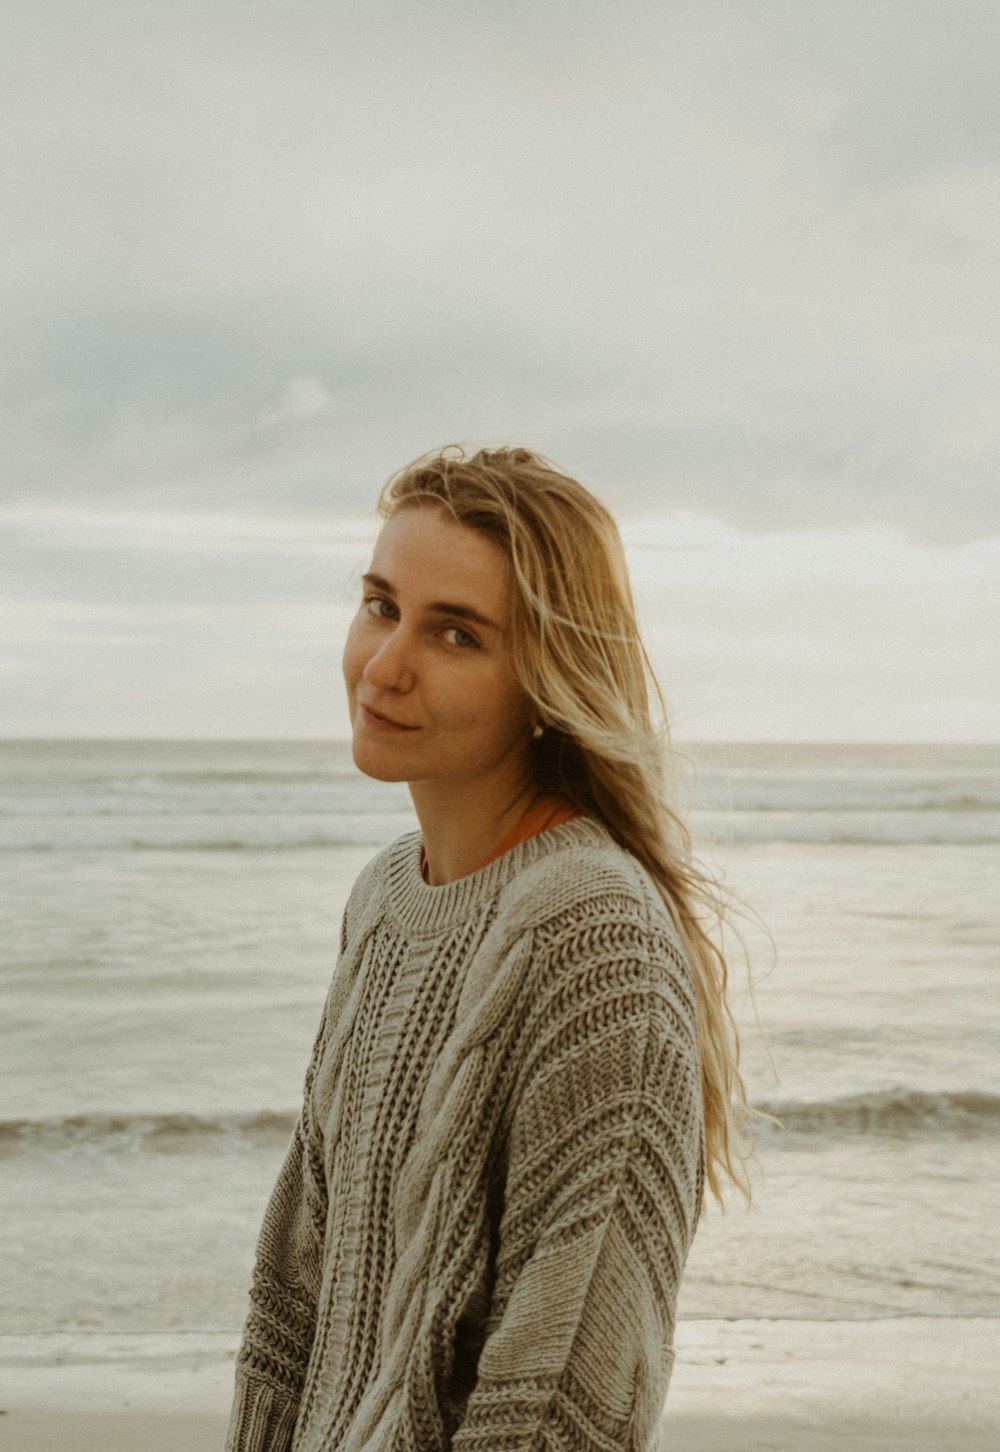 woman in gray knit sweater standing on beach during daytime